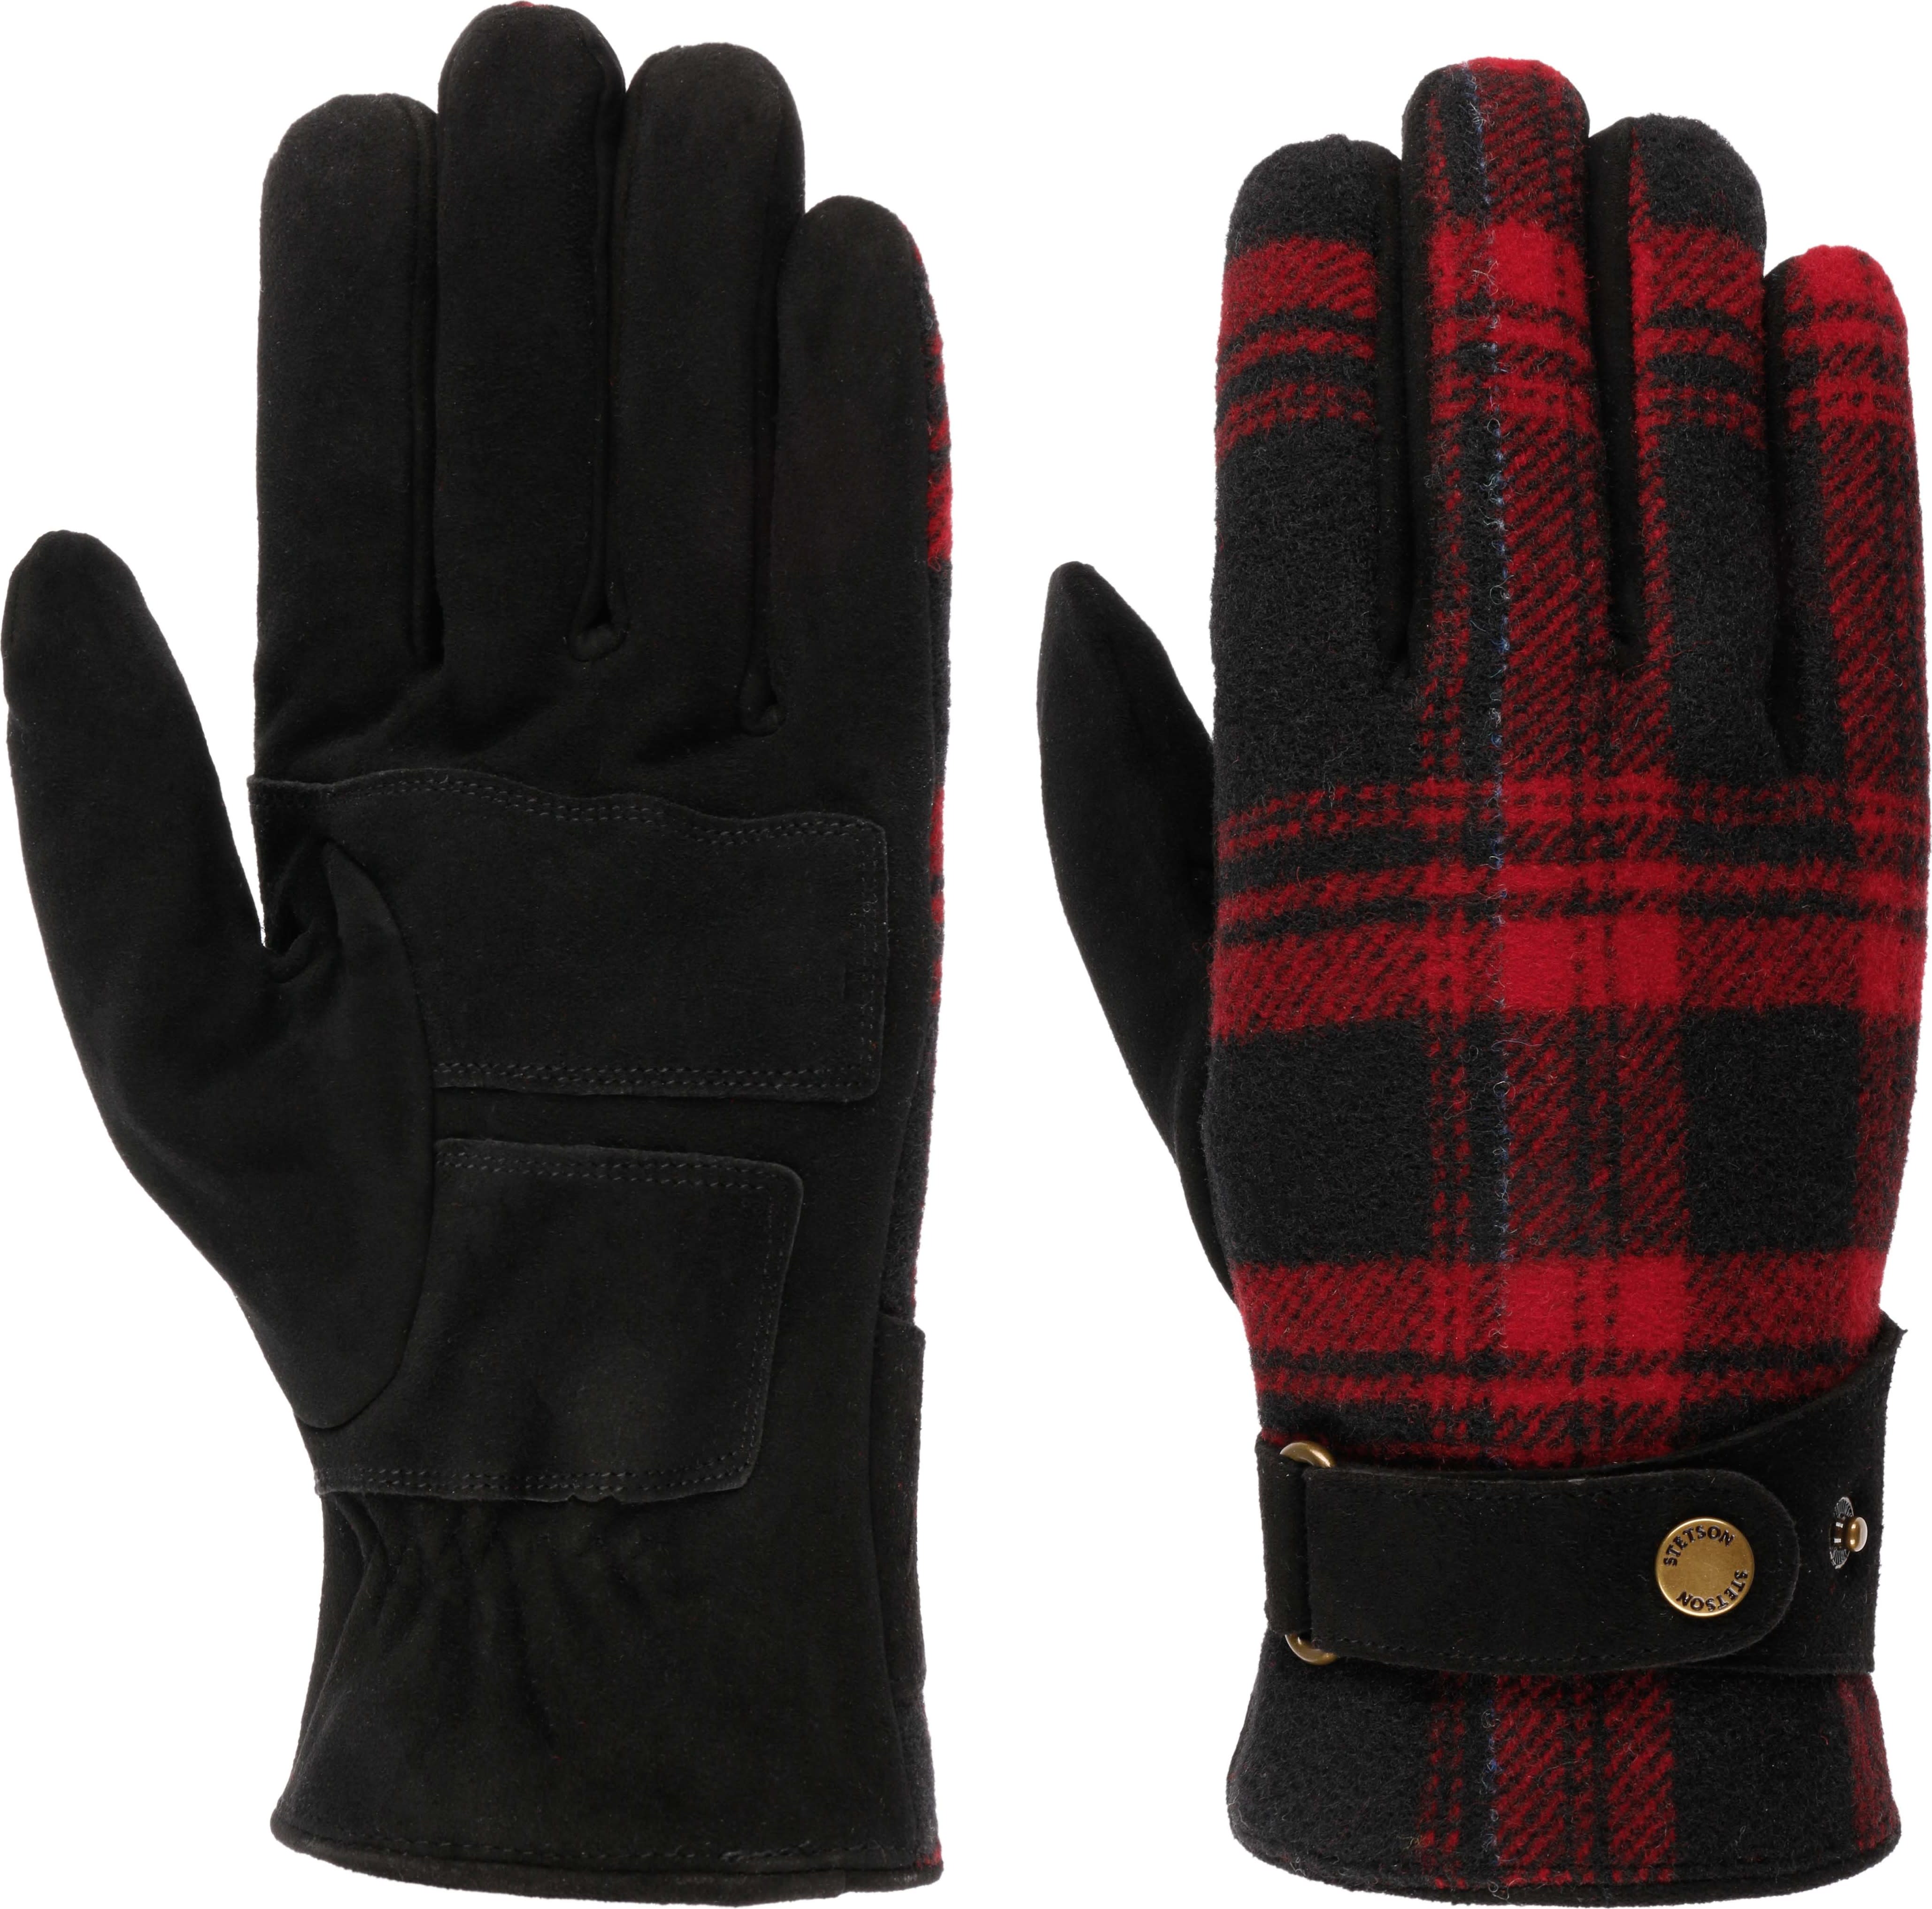 Men’s Gloves Goat Suede/Shadow Plaid Black/Red